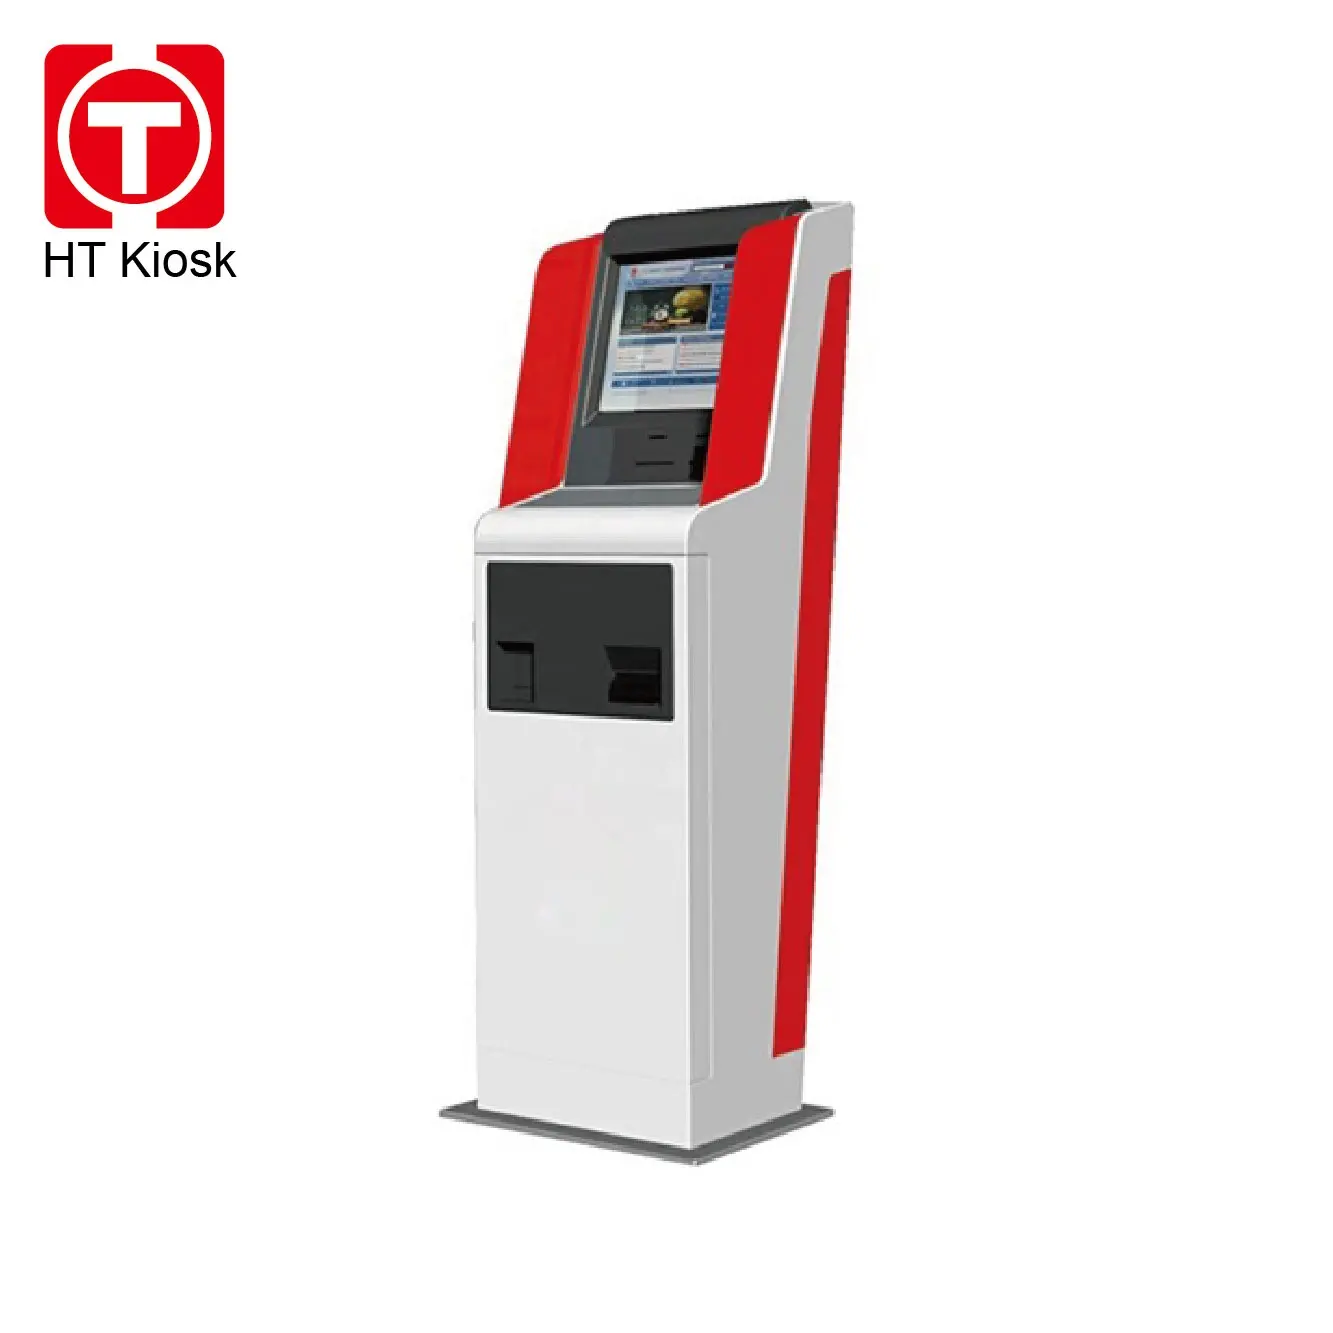 Bus station self service ticket service kiosk for bus card buying and recharge with cash acceptor and POS machine for option